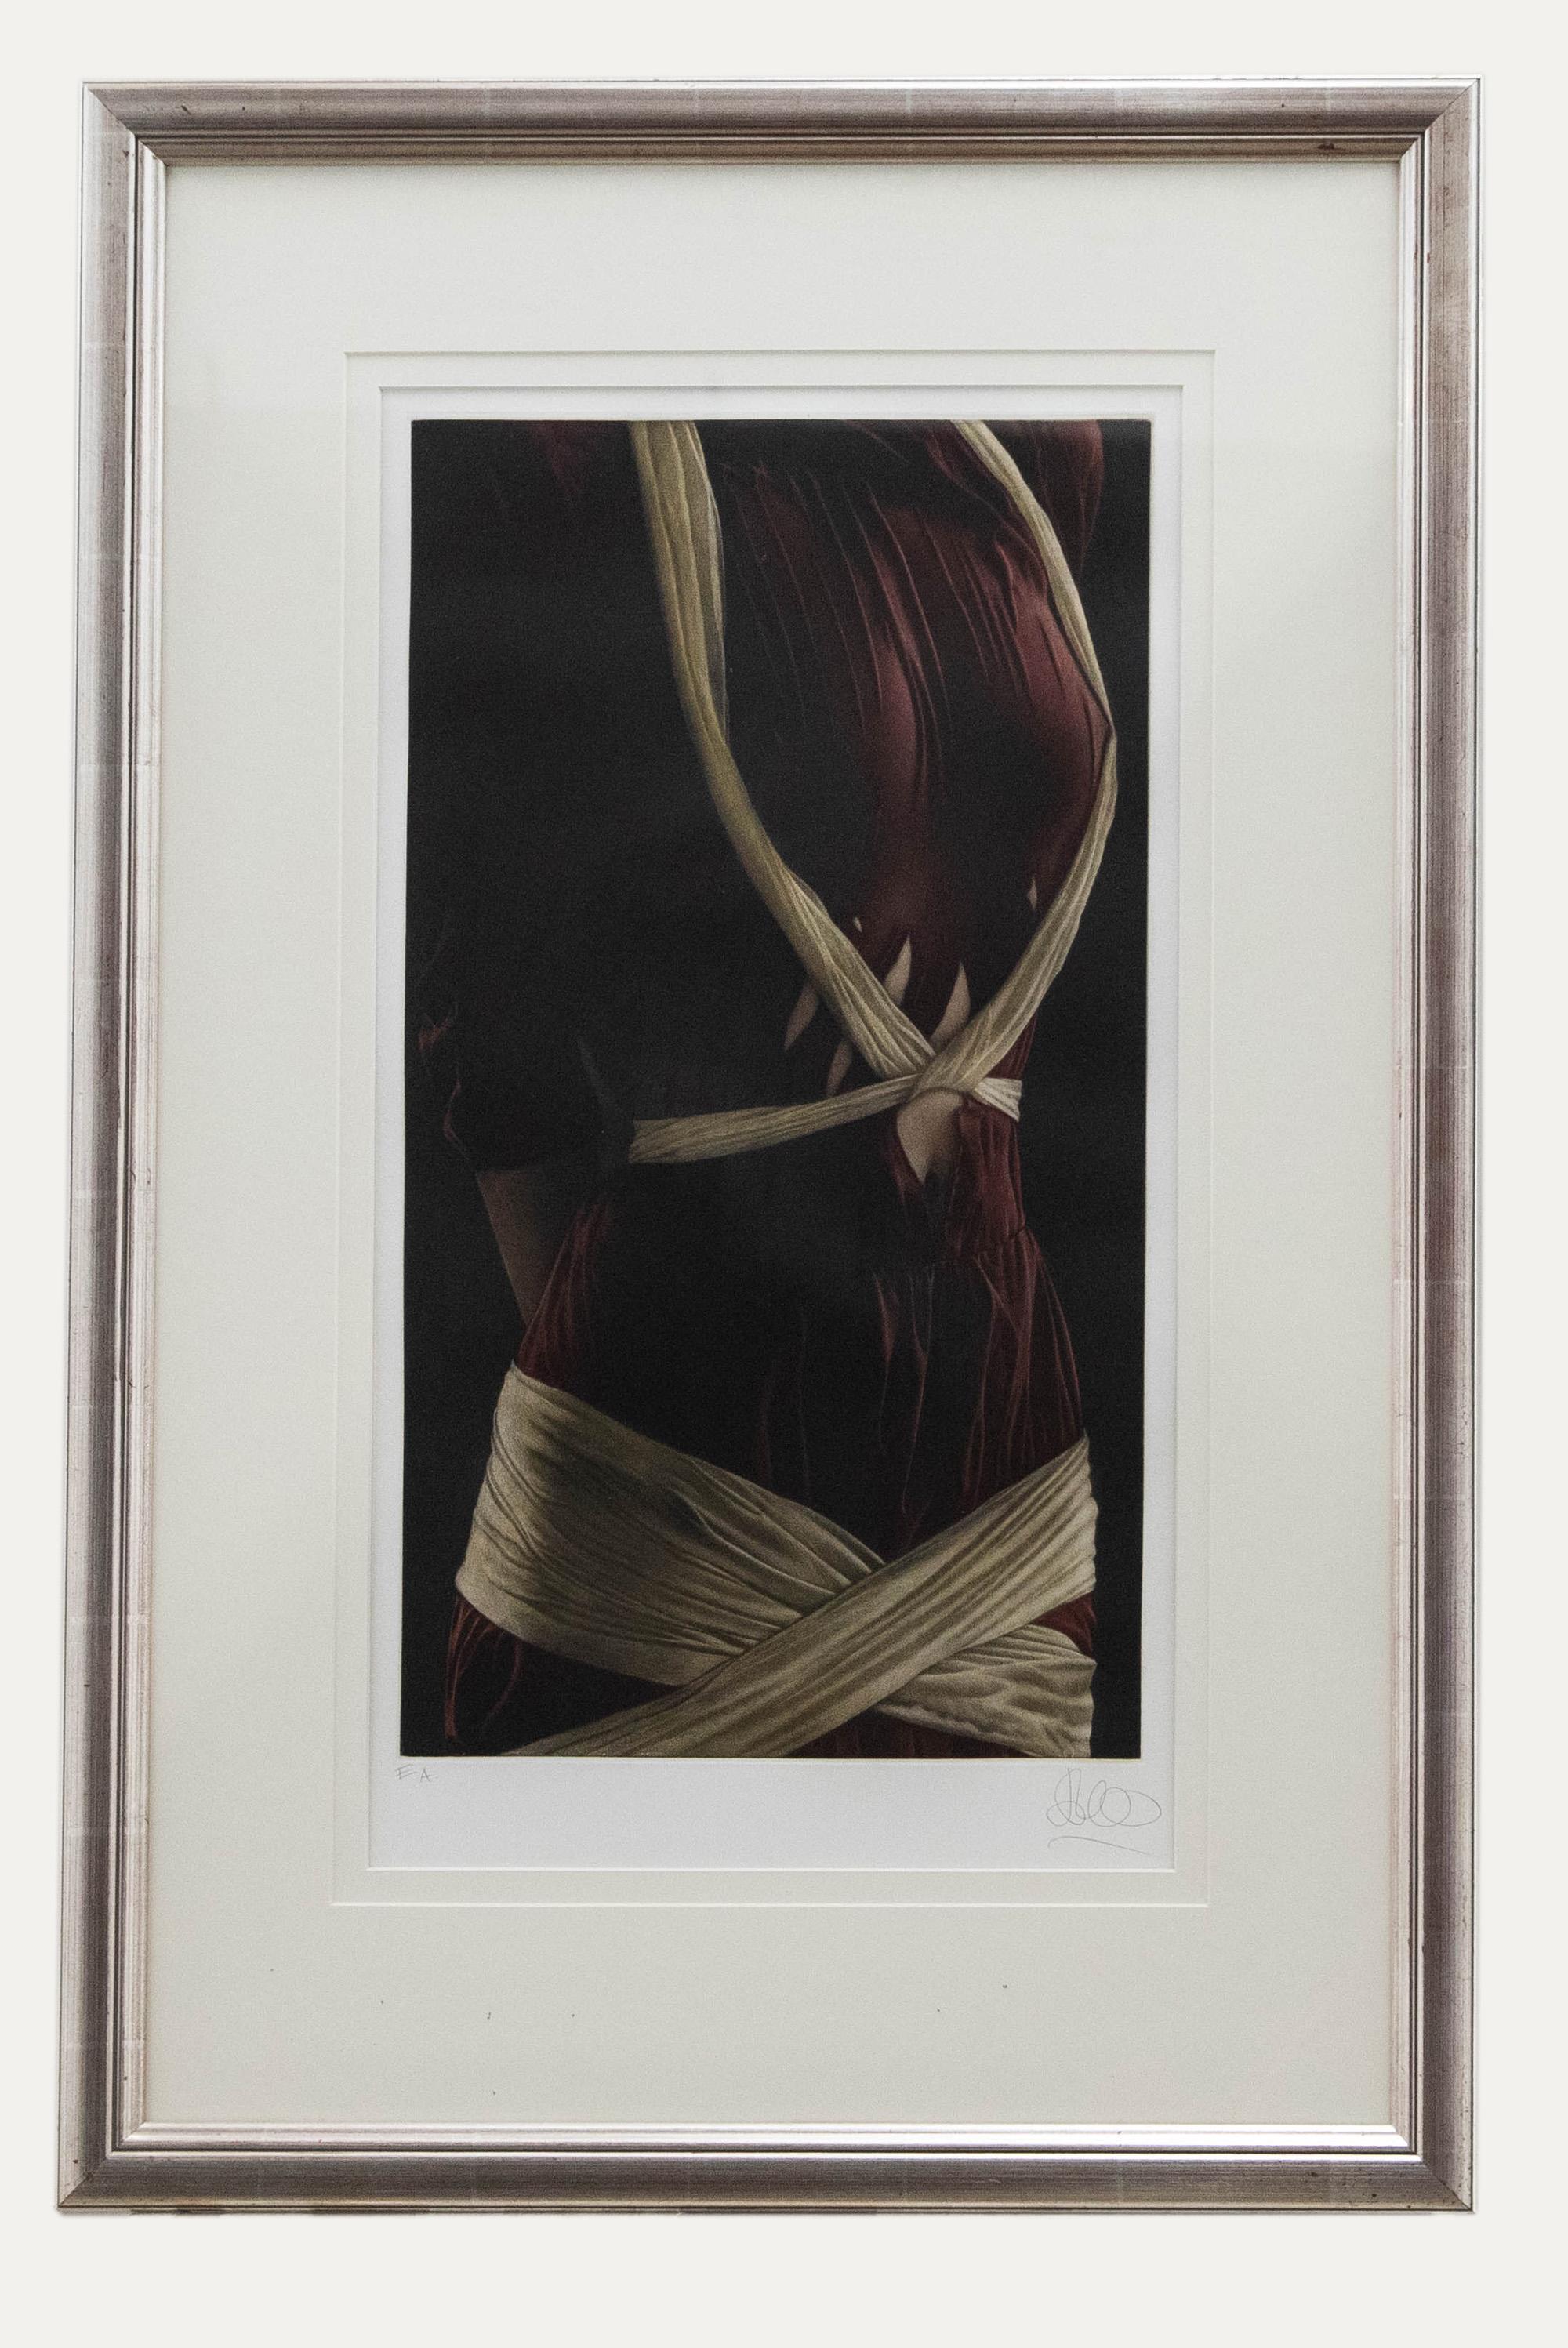 A limited edition etching in colours by contemporary artist Willi Kissmer (1951-2018). Signed in pencil to the lower margin. Editioned E.A (artist proof). Mounted in a sleek silver-effect frame with glazing. Titled to the reverse. On heavy wove.